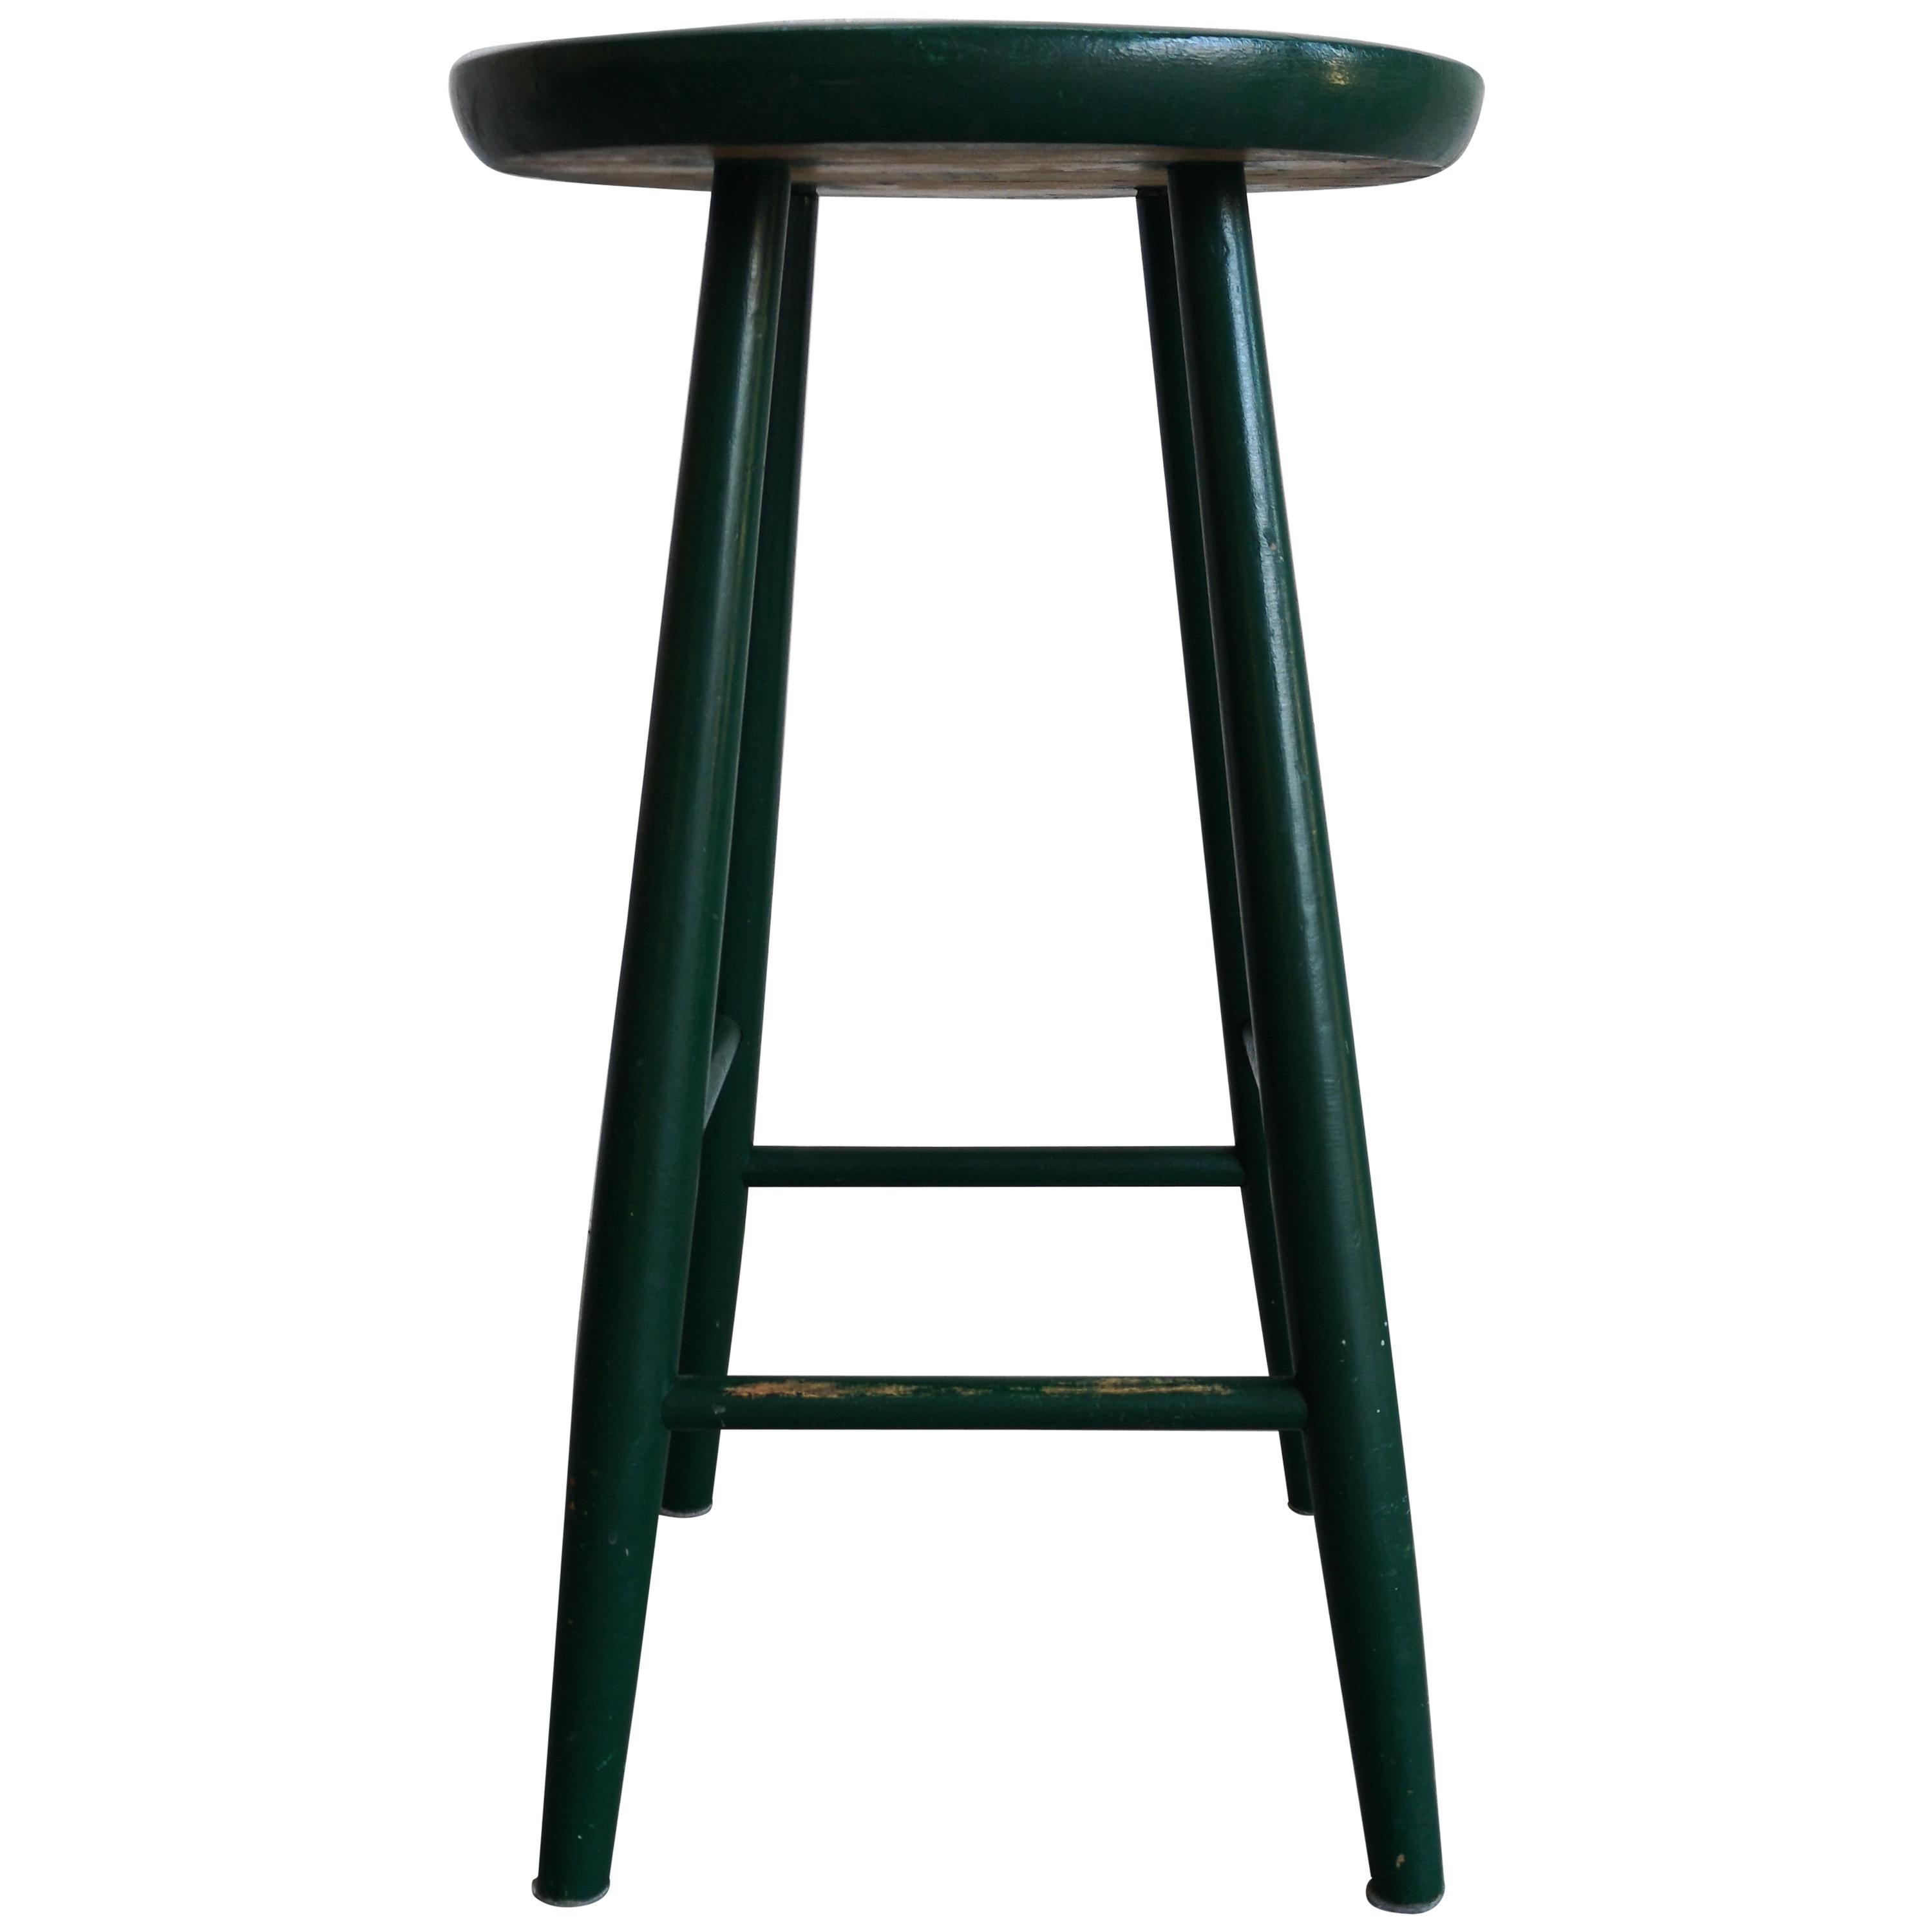 Midcentury Stool Made by Hagafors Stolfabriken, Sweden For Sale